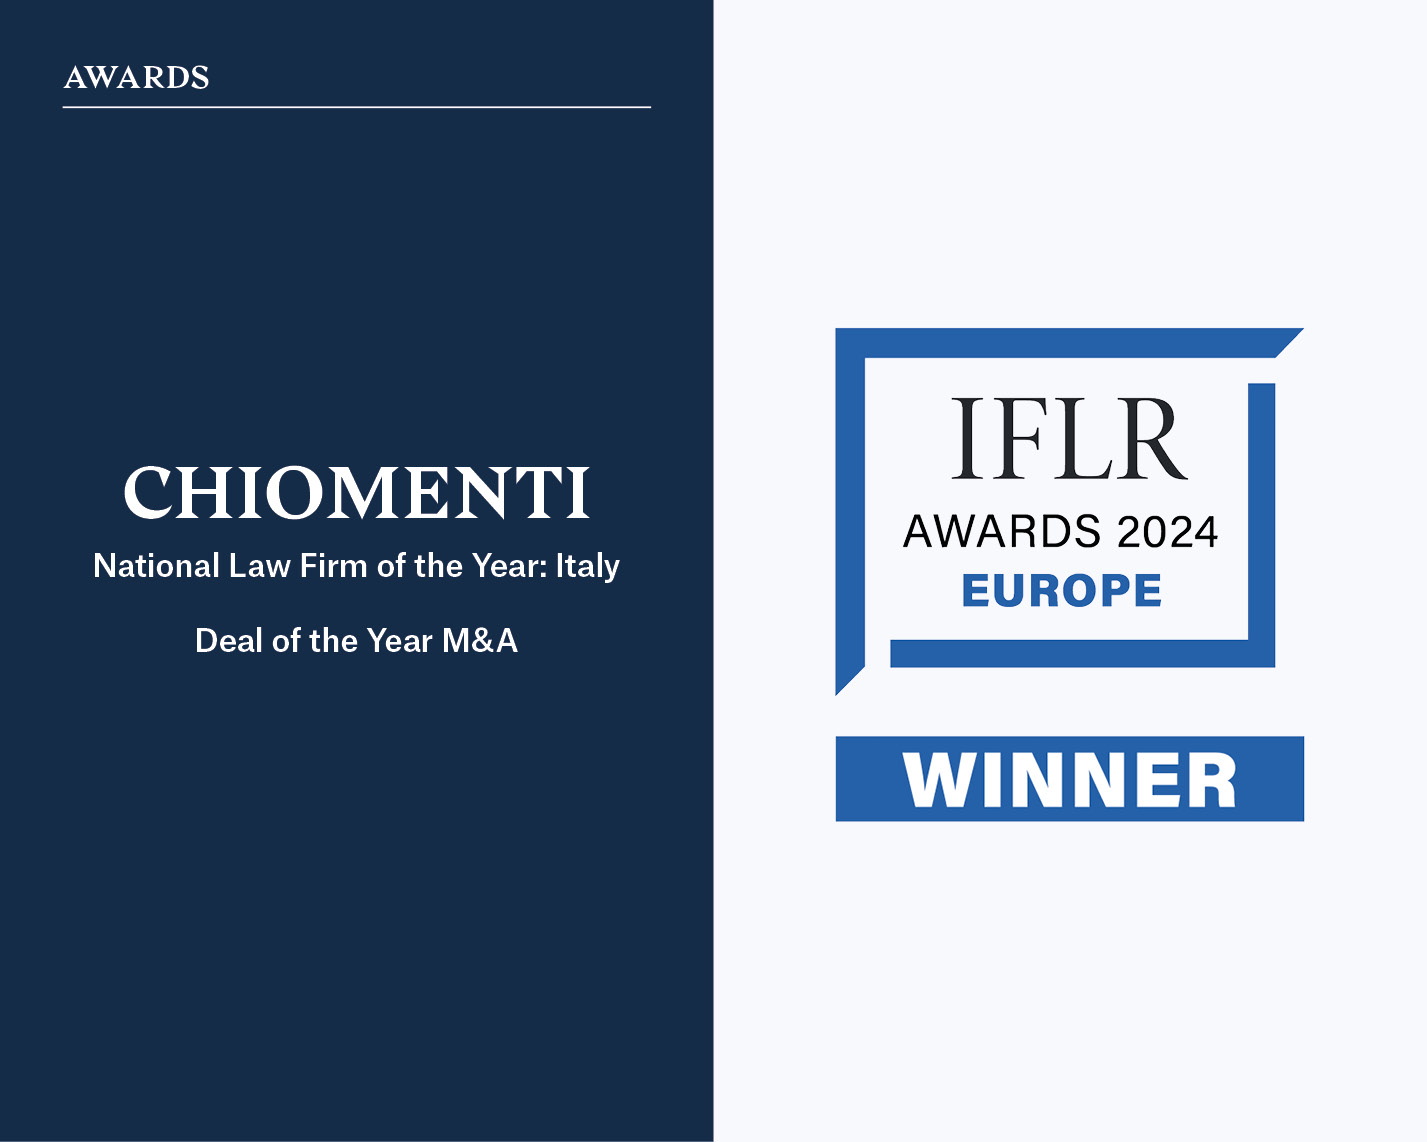 IFLR Awards 2024 | Chiomenti named Law Firm of the Year